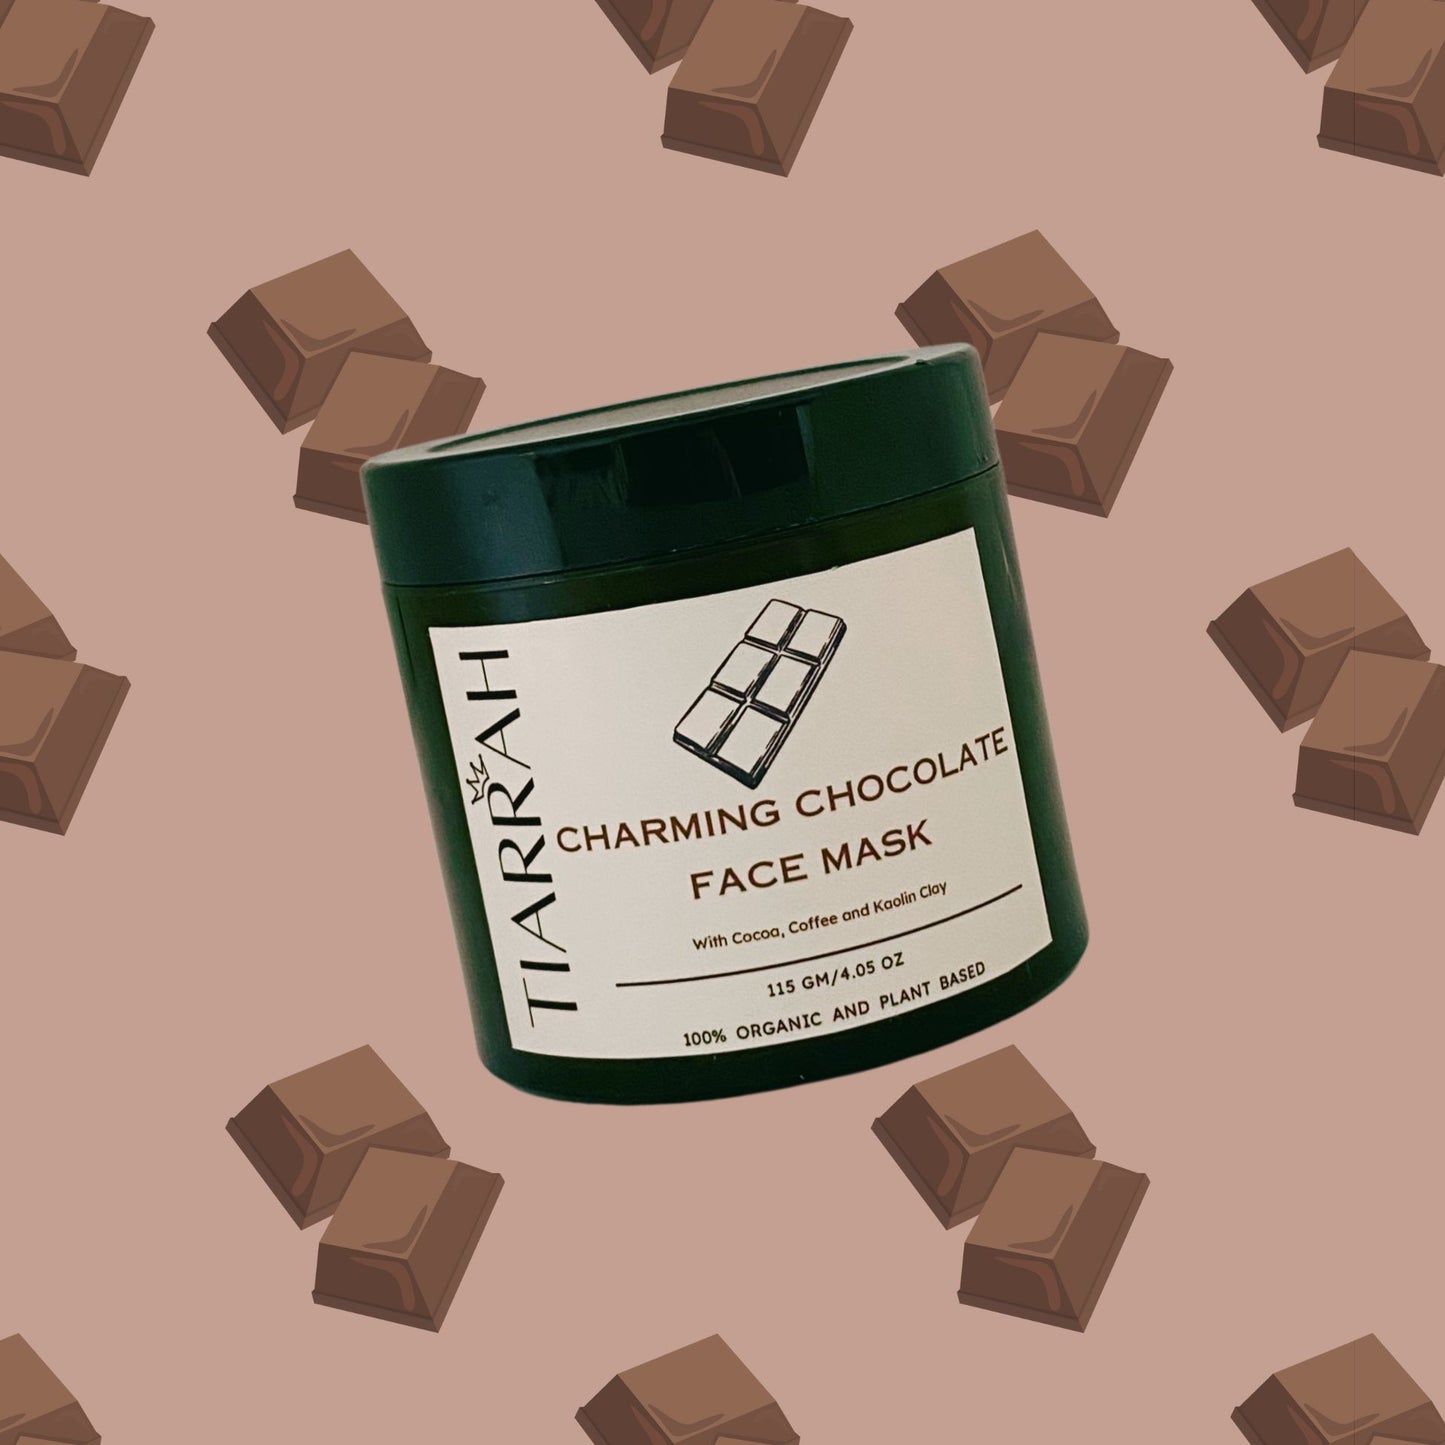 Tiarrah's Chocolate Face Mask: Natural & Non-Toxic - The Luxury Bath and Body Care Shop